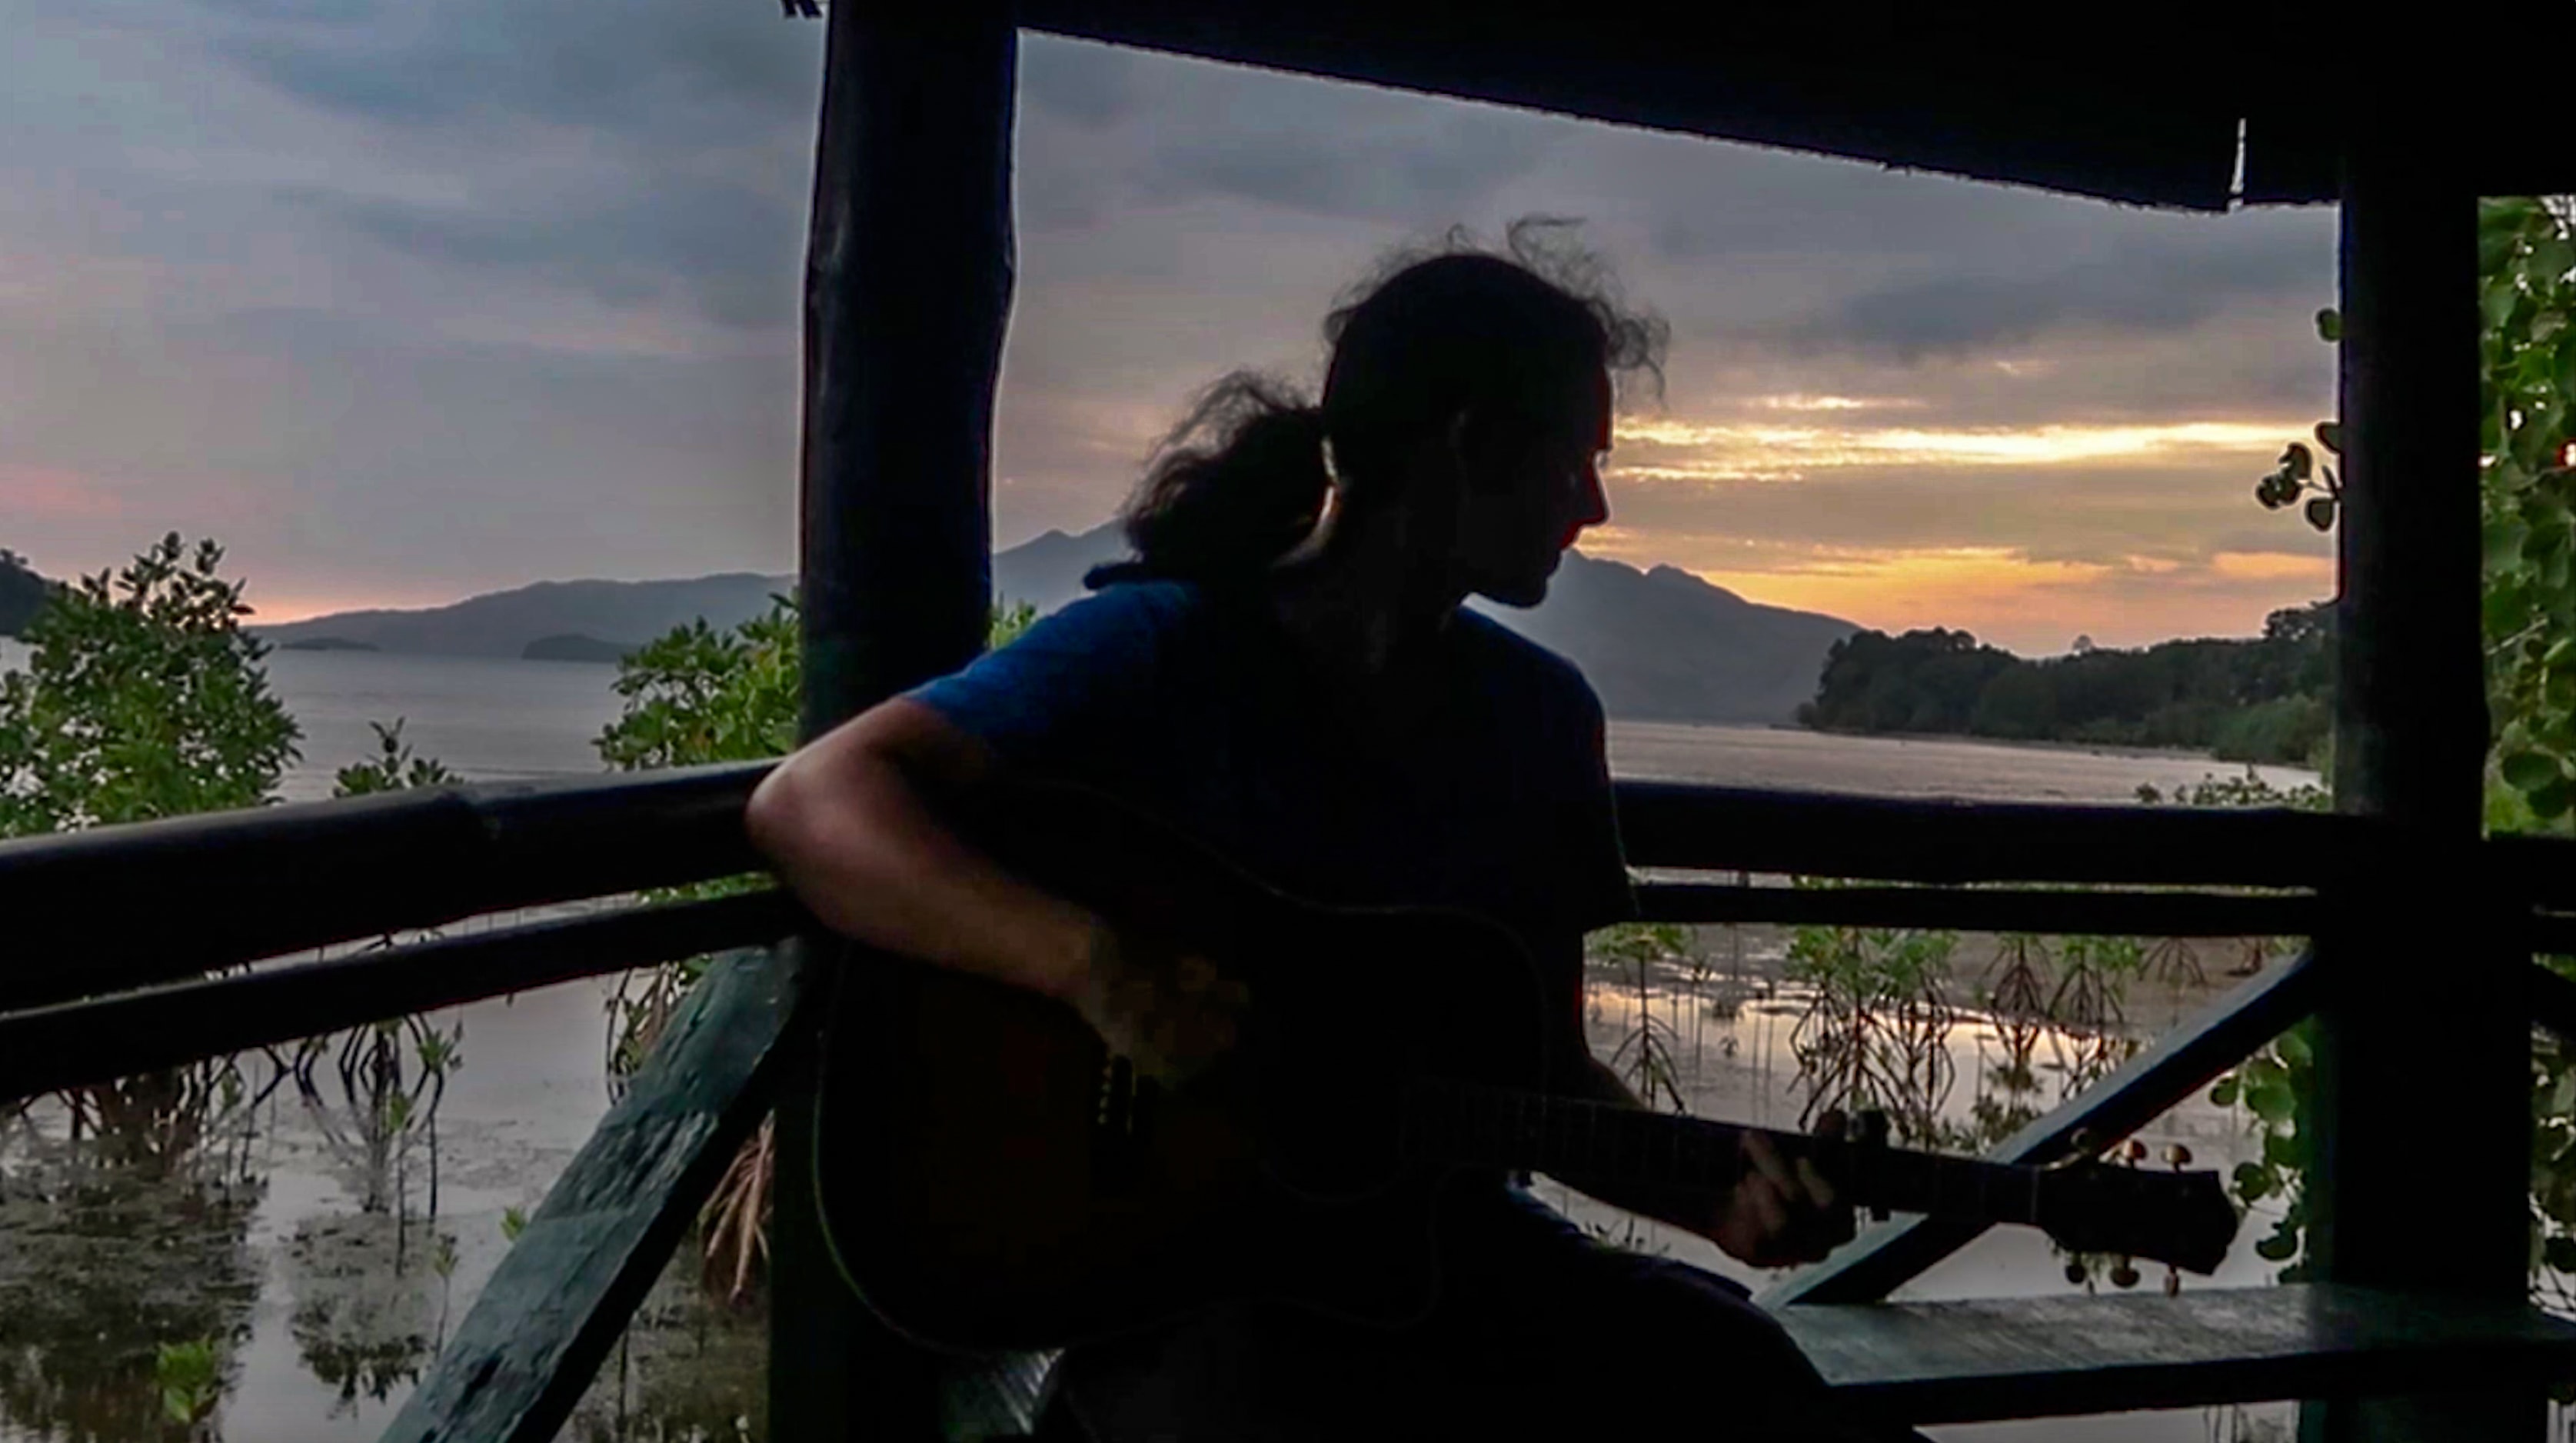 lenny through paradise play guitar in subic zambales philippines